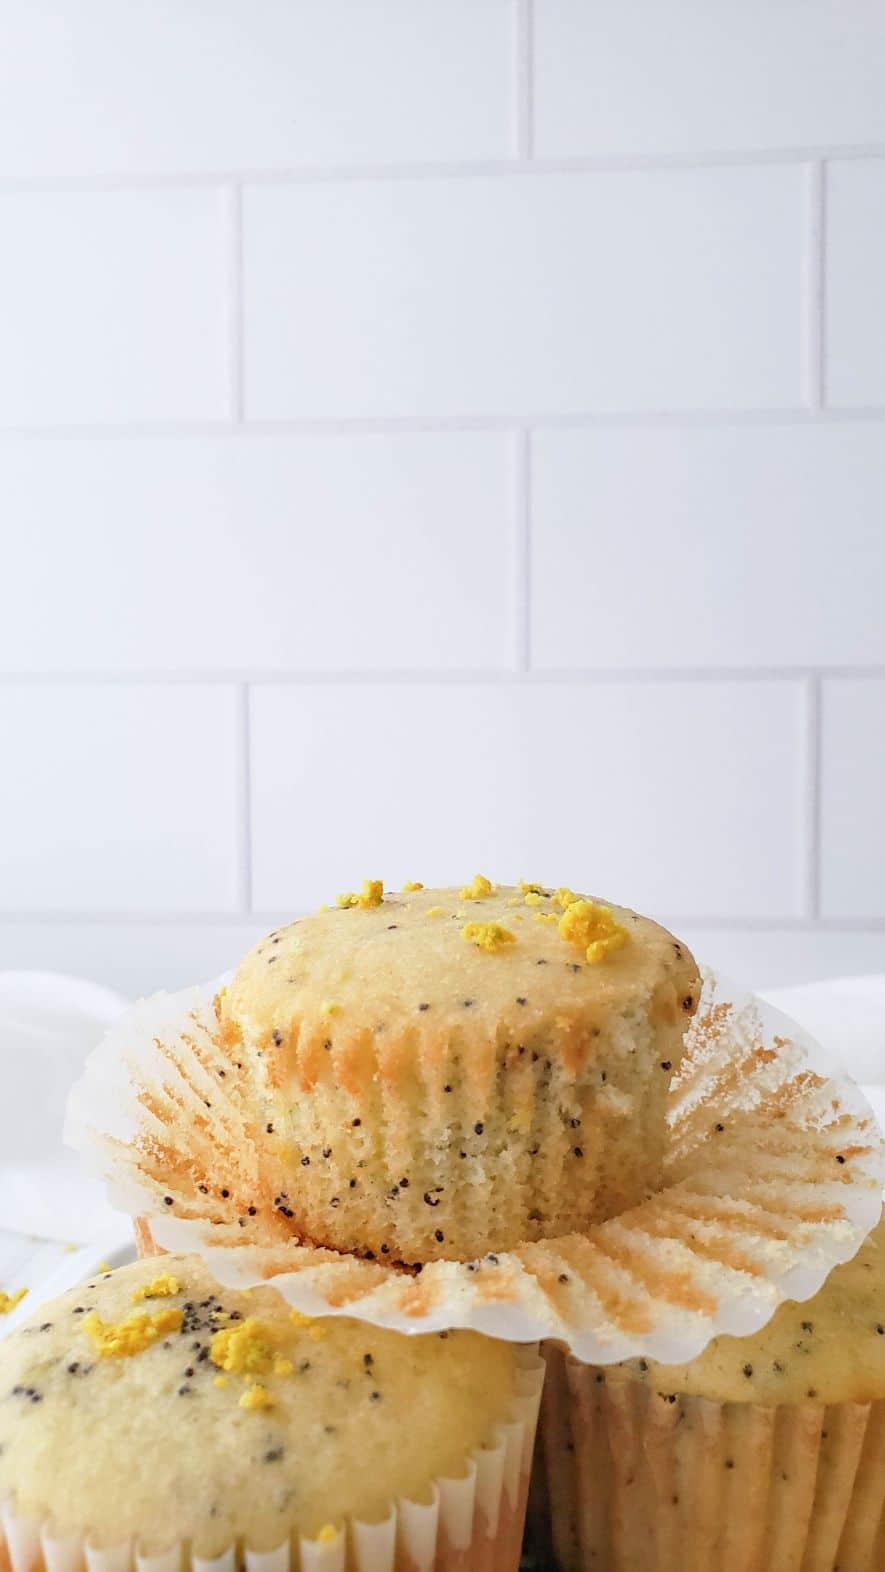 Up close shot of a bitten muffin stacked on top of two whole muffins with slices of lemon in the foreground